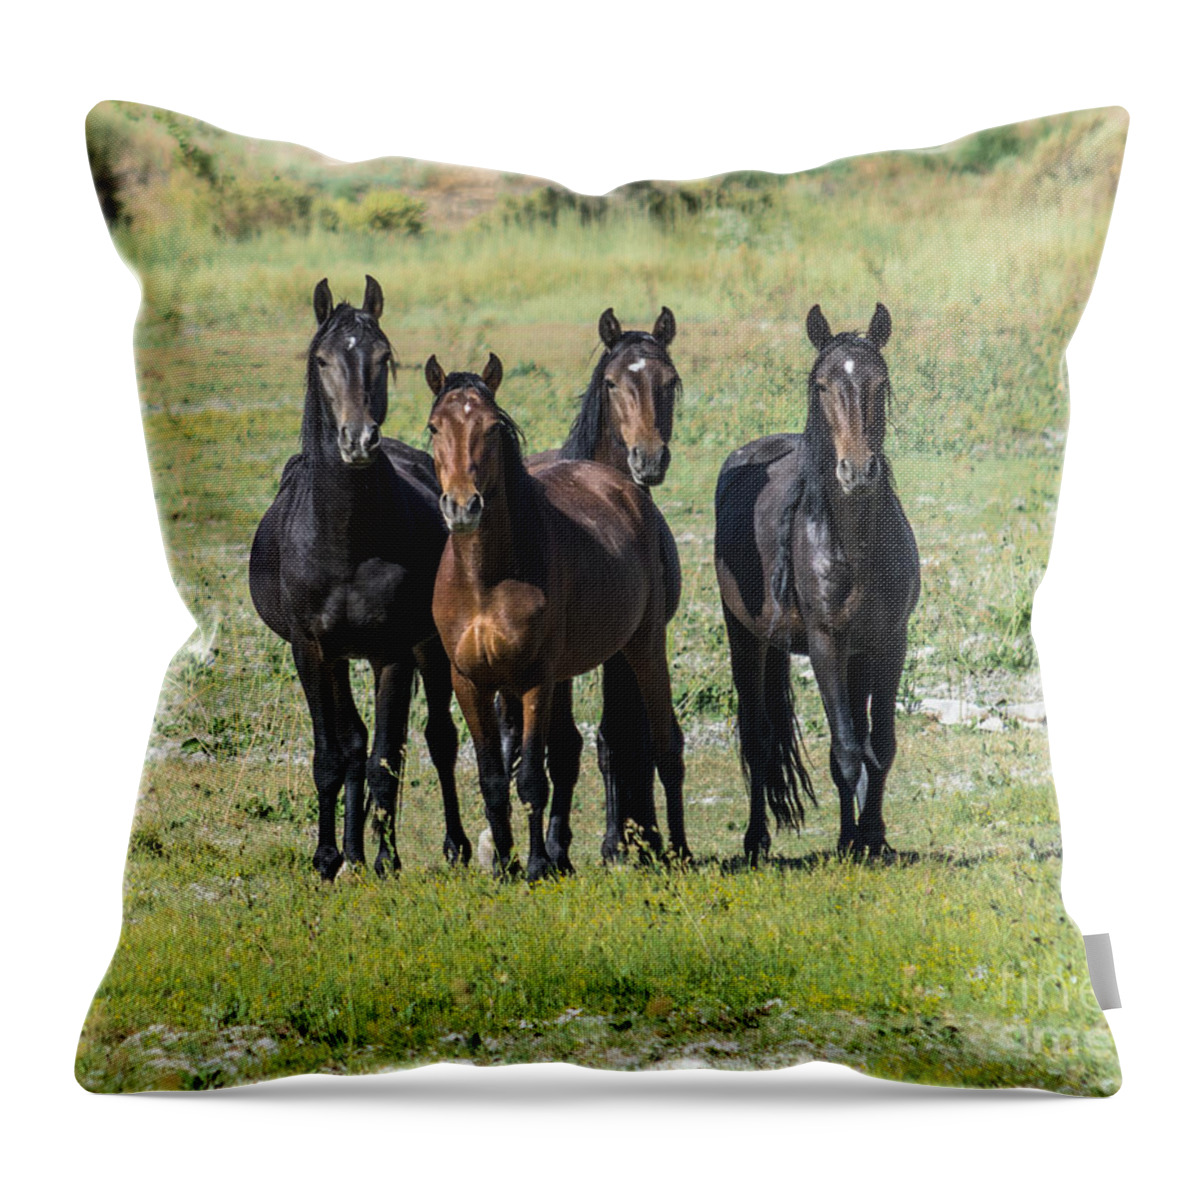 Wild Horses Throw Pillow featuring the photograph Wild Mustang Horses by L J Oakes